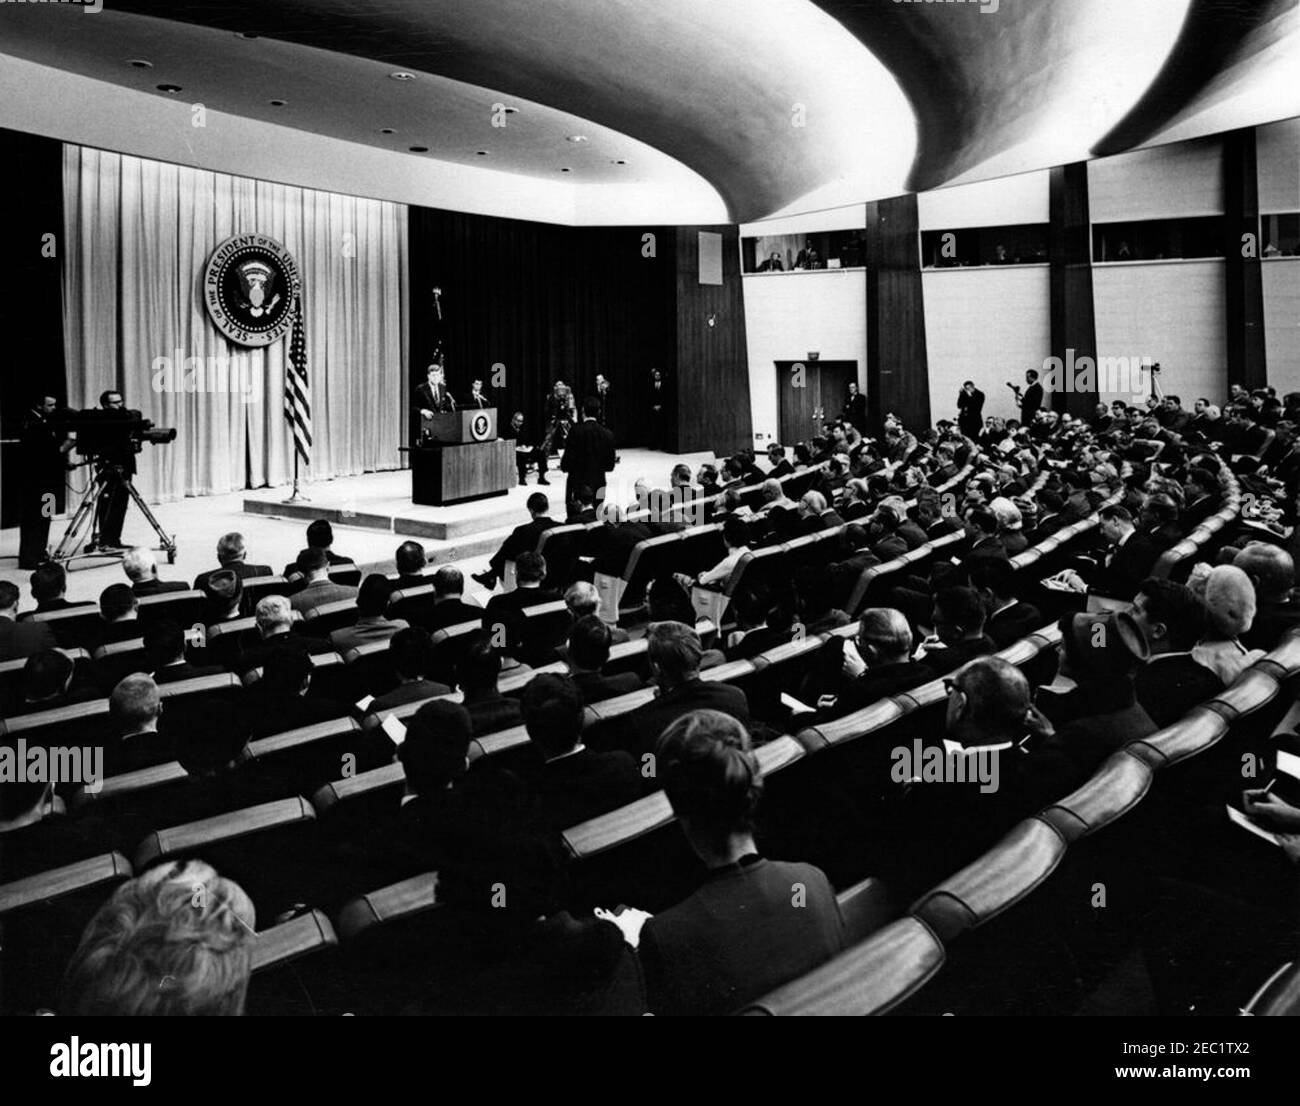 Press Conference, State Department Auditorium, 4:00PM. President John F. Kennedy (at lectern) speaks to reporters during a press conference in the State Department Auditorium, Washington, D.C. Associate Press Secretary Andrew Hatcher sits onstage, right of the lectern. Stock Photo